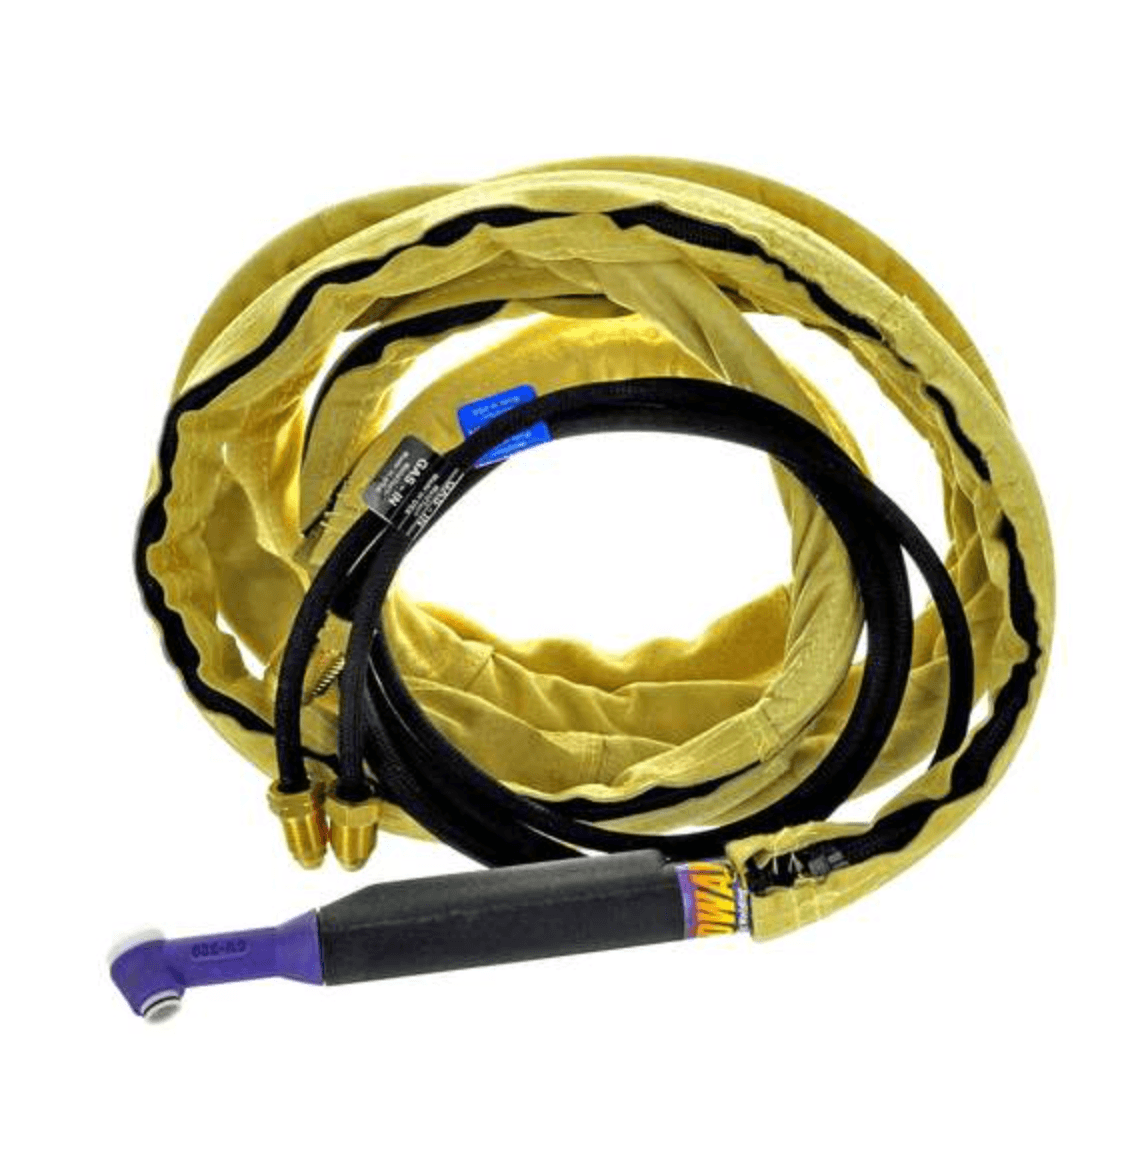 * WeldTec #20 Speedway Deluxe Water Cooled TIG Torch Kit, 12.5', Super Flex Cable ( SW-320-12DX)